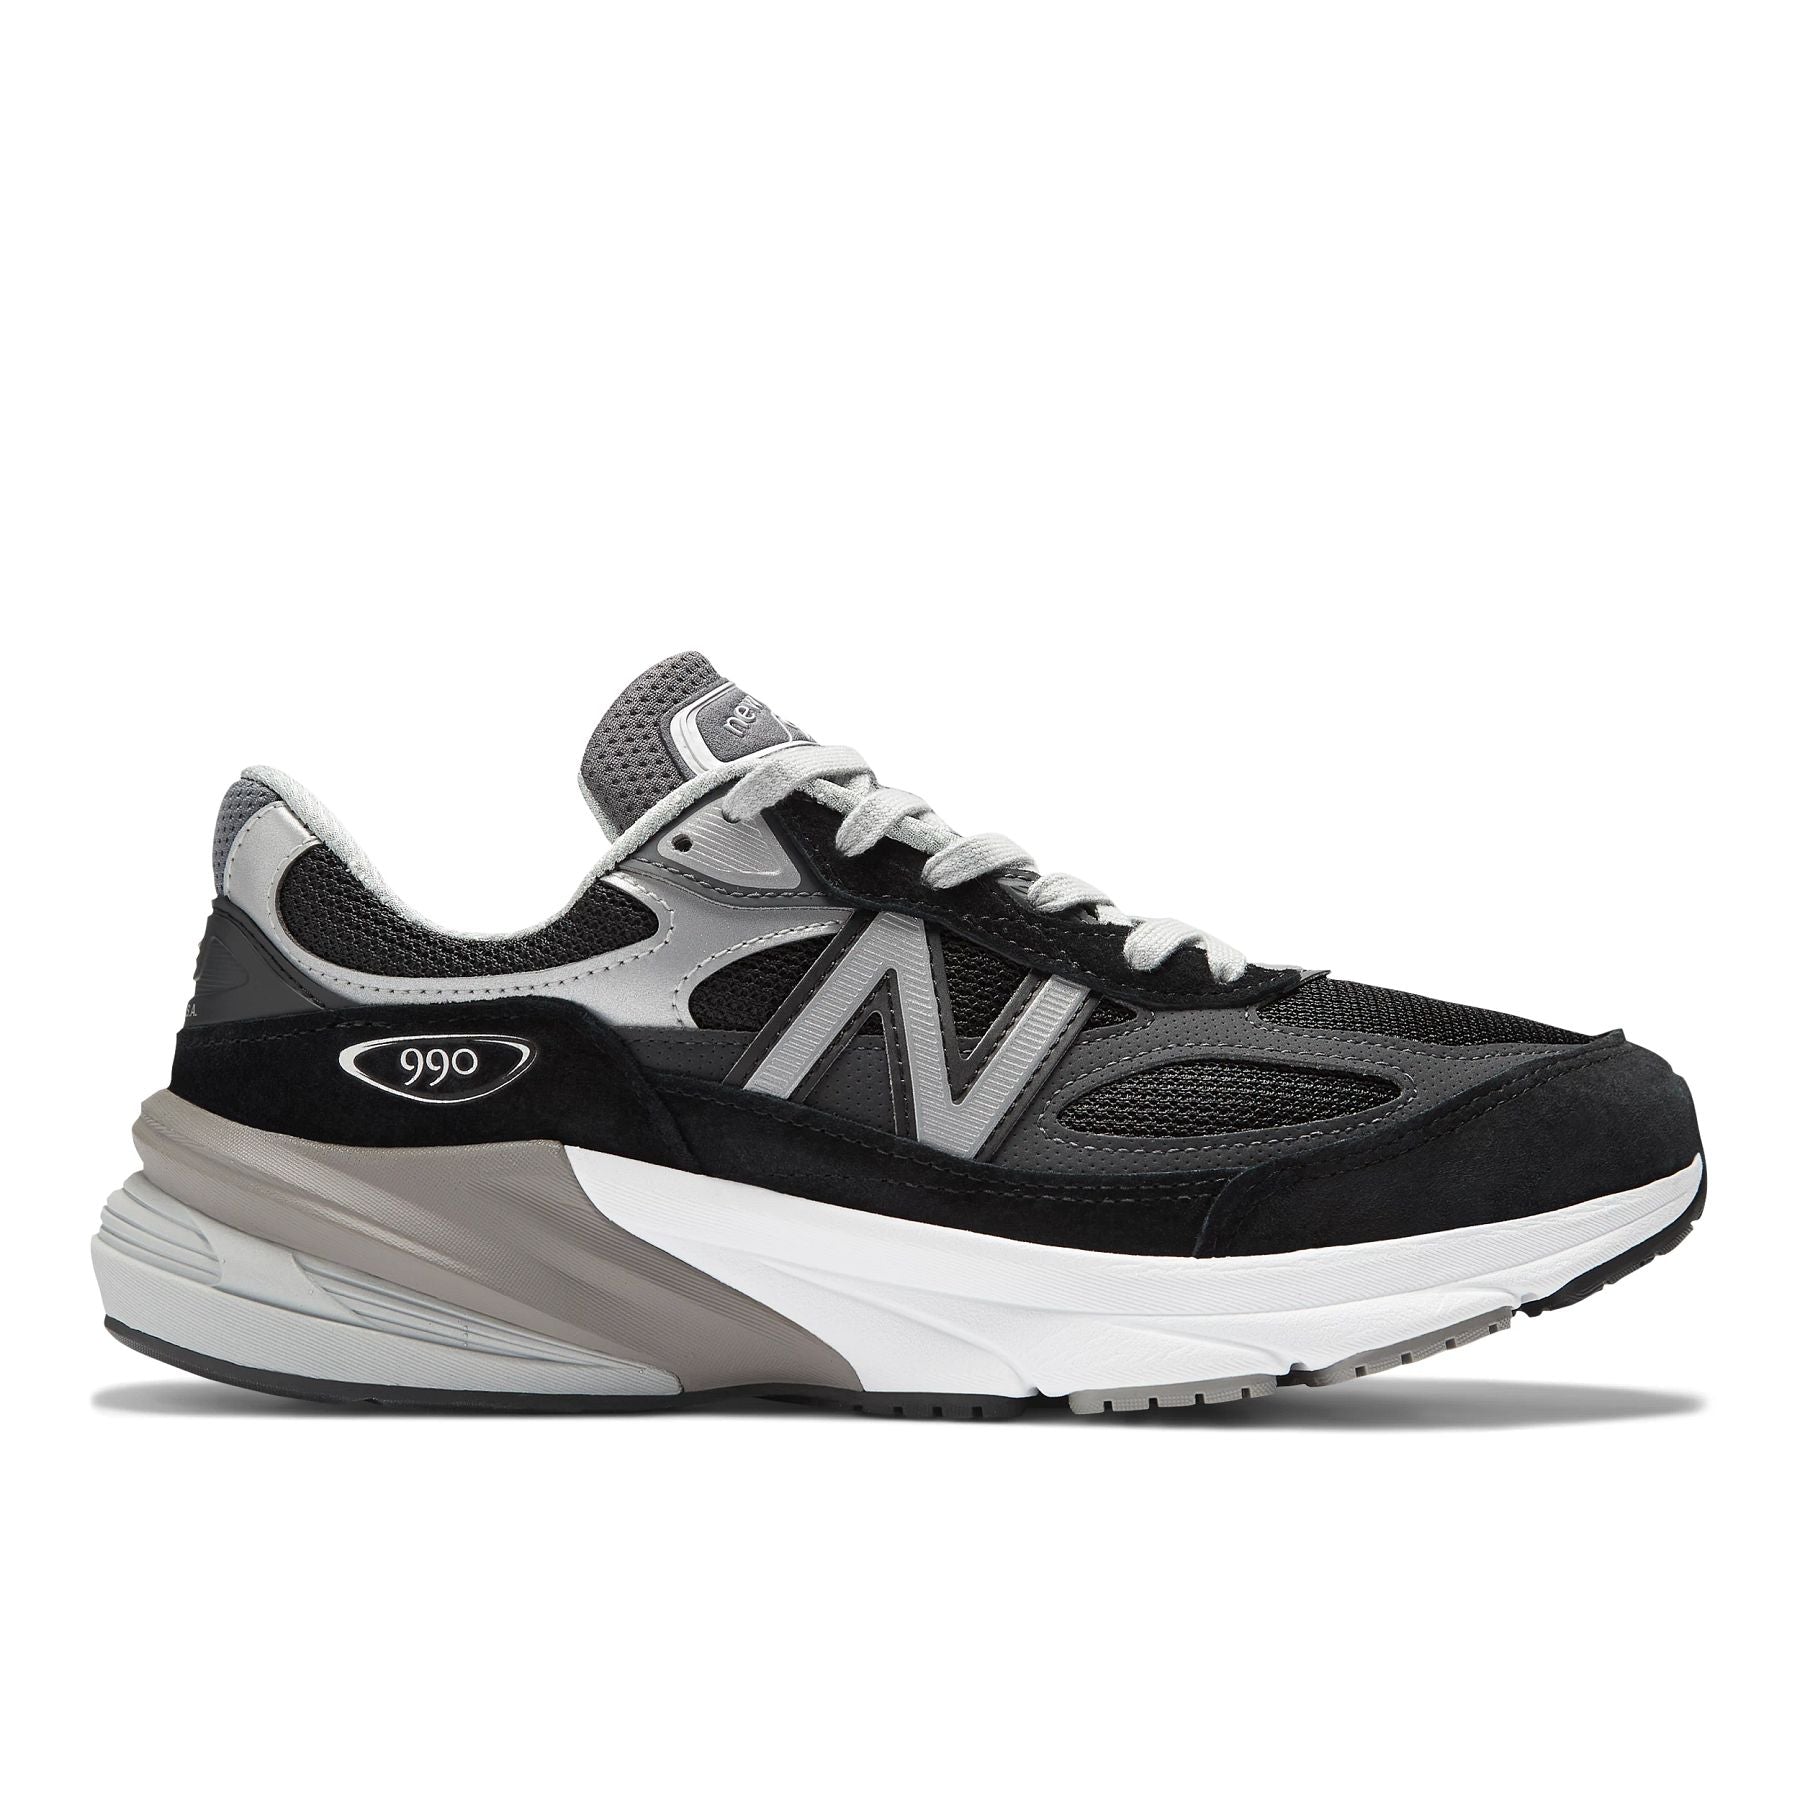 Lateral view of the Women's New Balance 990 V6 Lifestyle shoe in Black/White